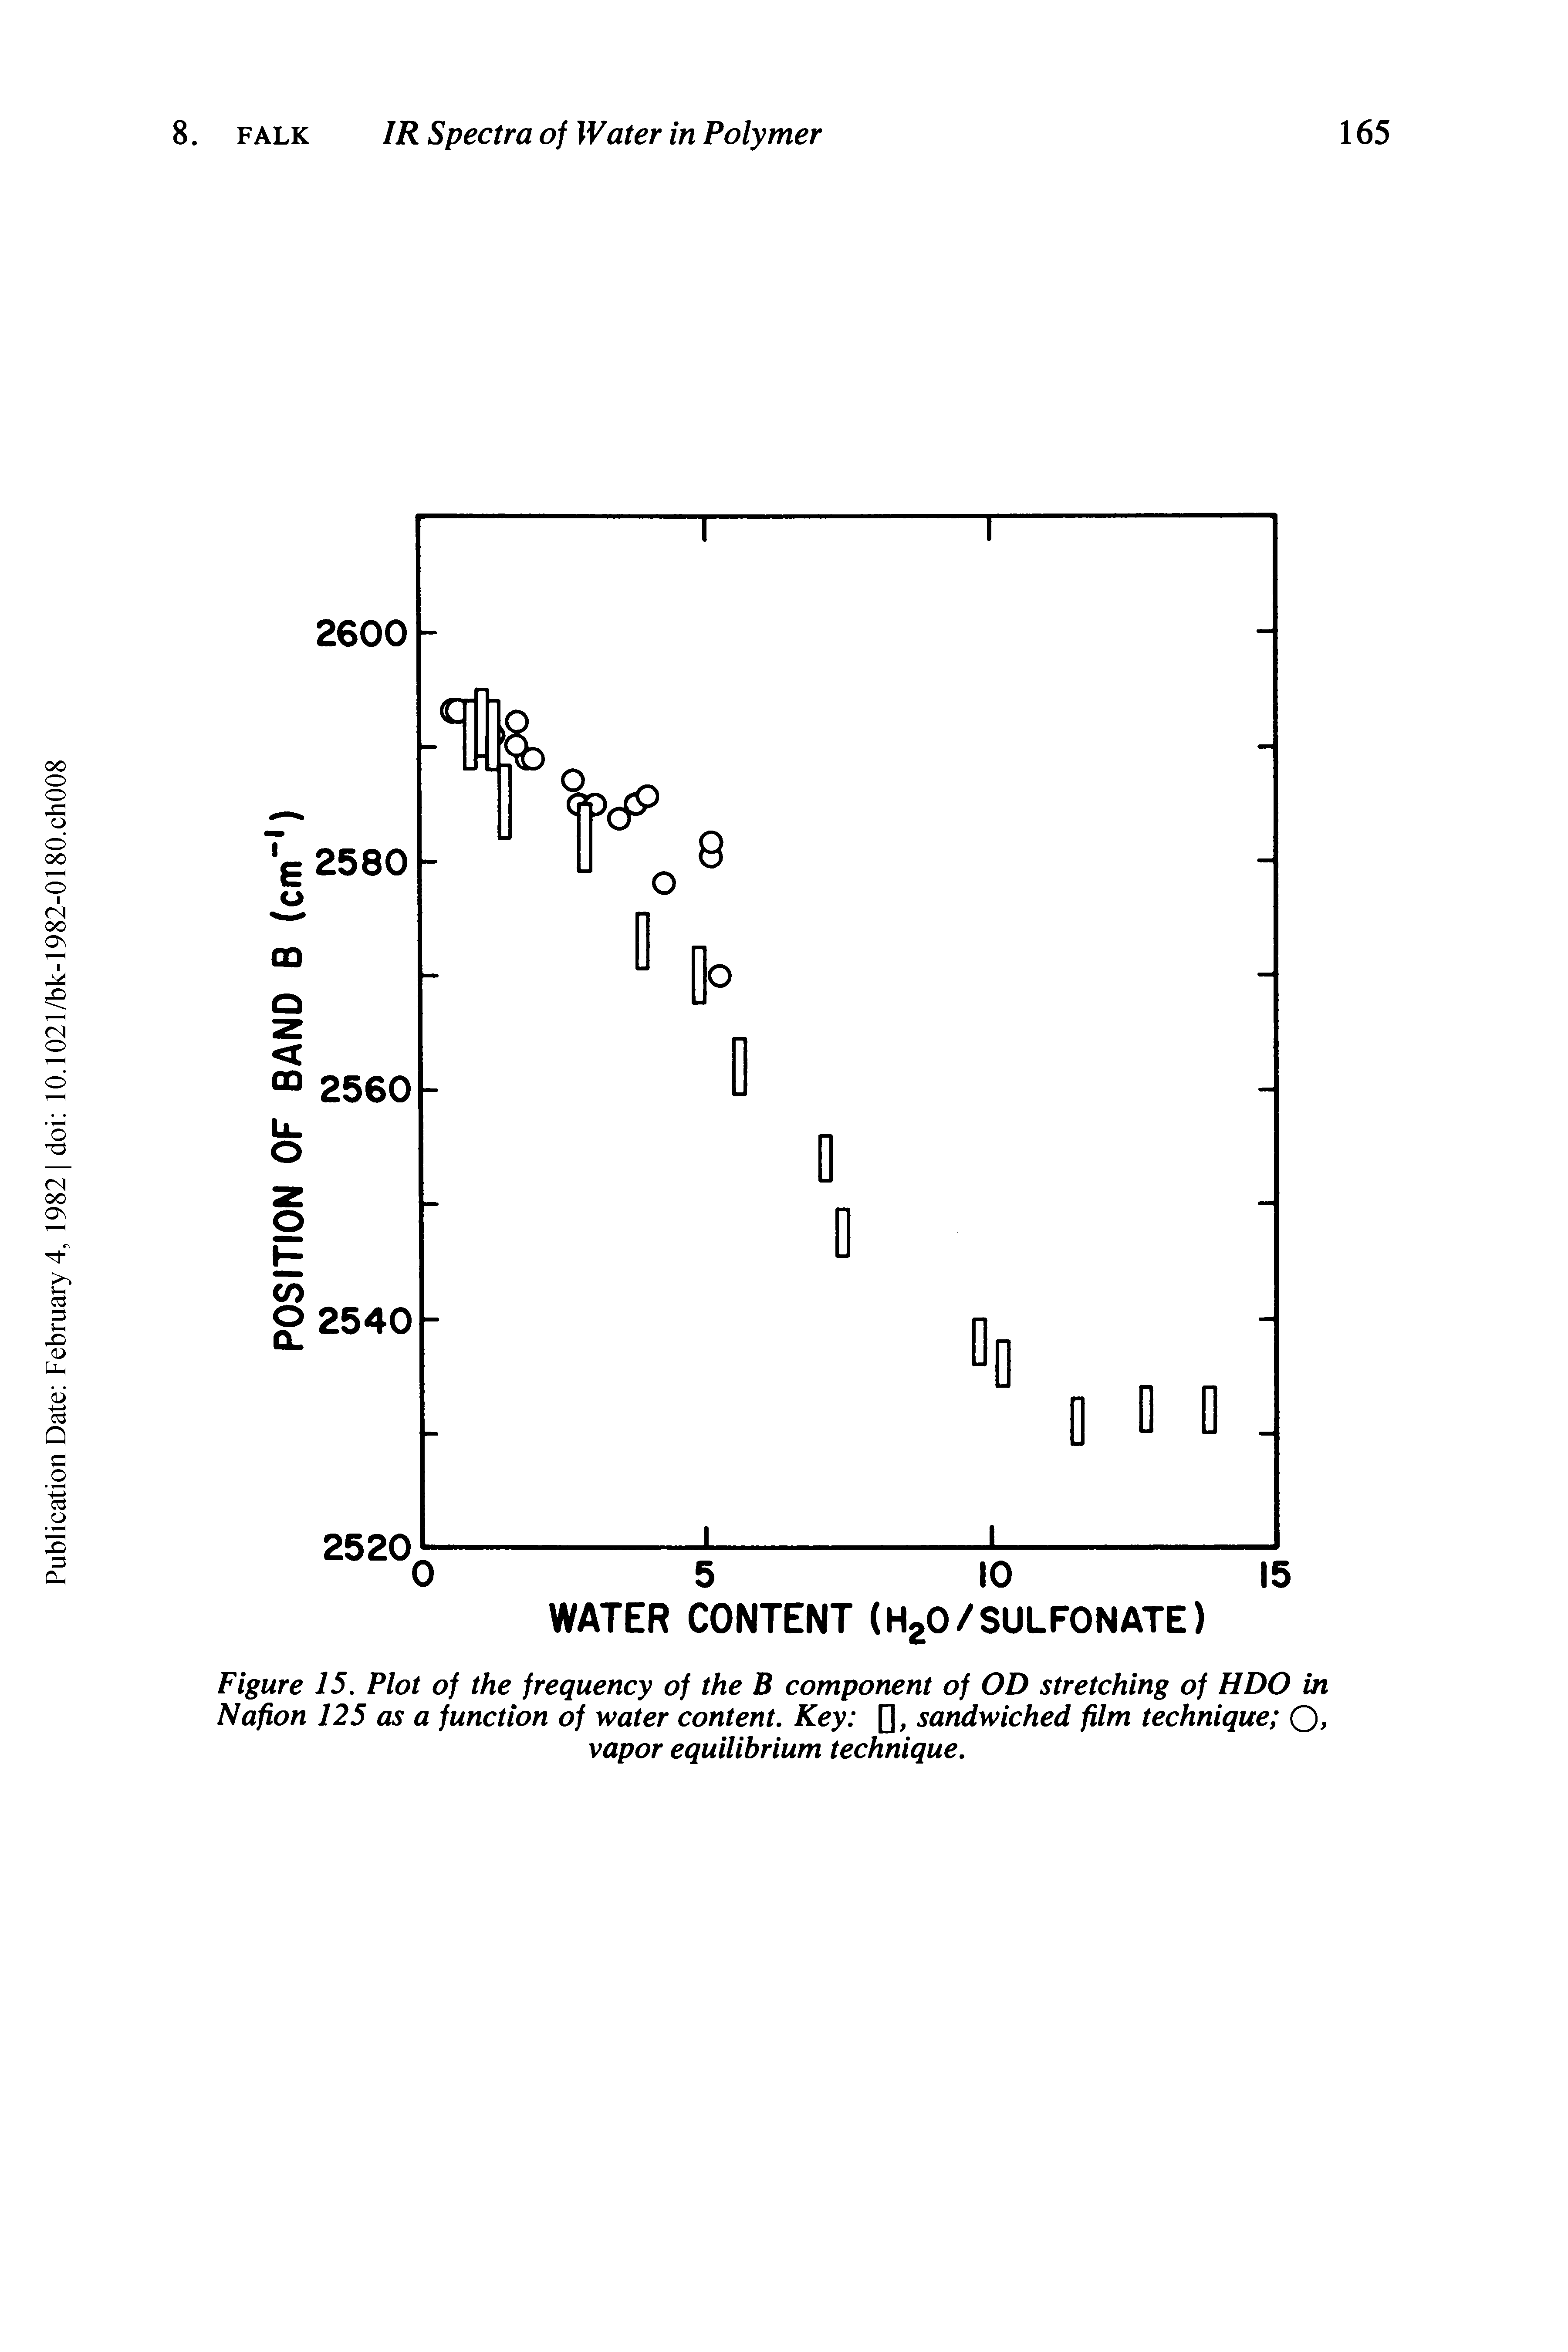 Figure 15. Plot of the frequency of the B component of OD stretching of HDO in Nafion 125 as a function of water content. Key [], sandwiched film technique o, vapor equilibrium technique.